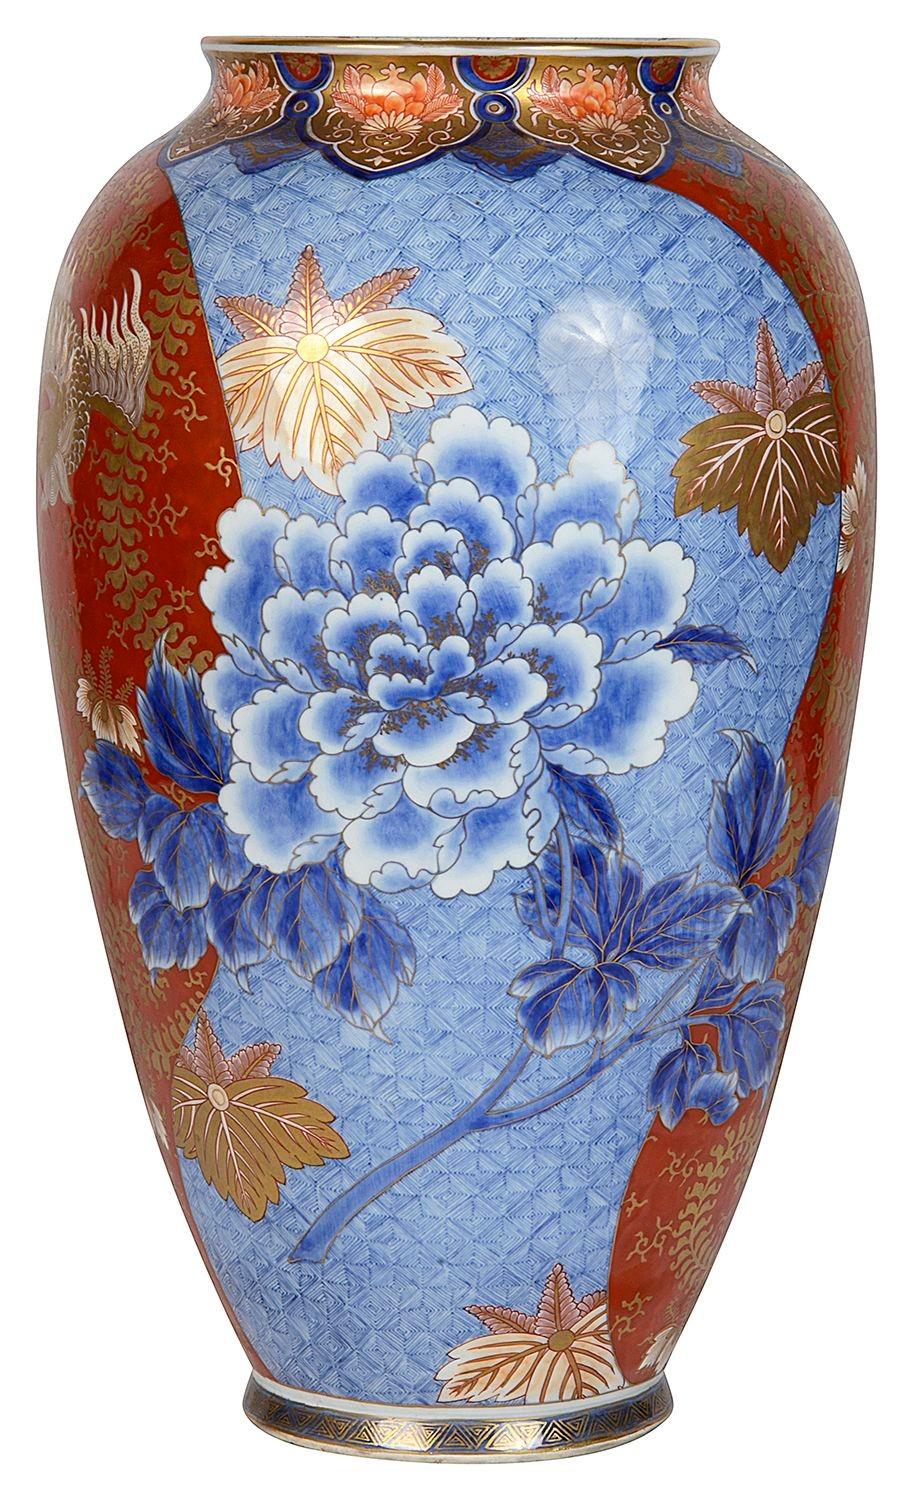 A beautiful fine quality Japanese Meiji period (1868-1912) Fukagawa porcelain vase. Depicting classical motifs decoration, red and blue ground sections with exotic flowers.
We can convert to a lamp if required.
Signed to the base.

Batch 74